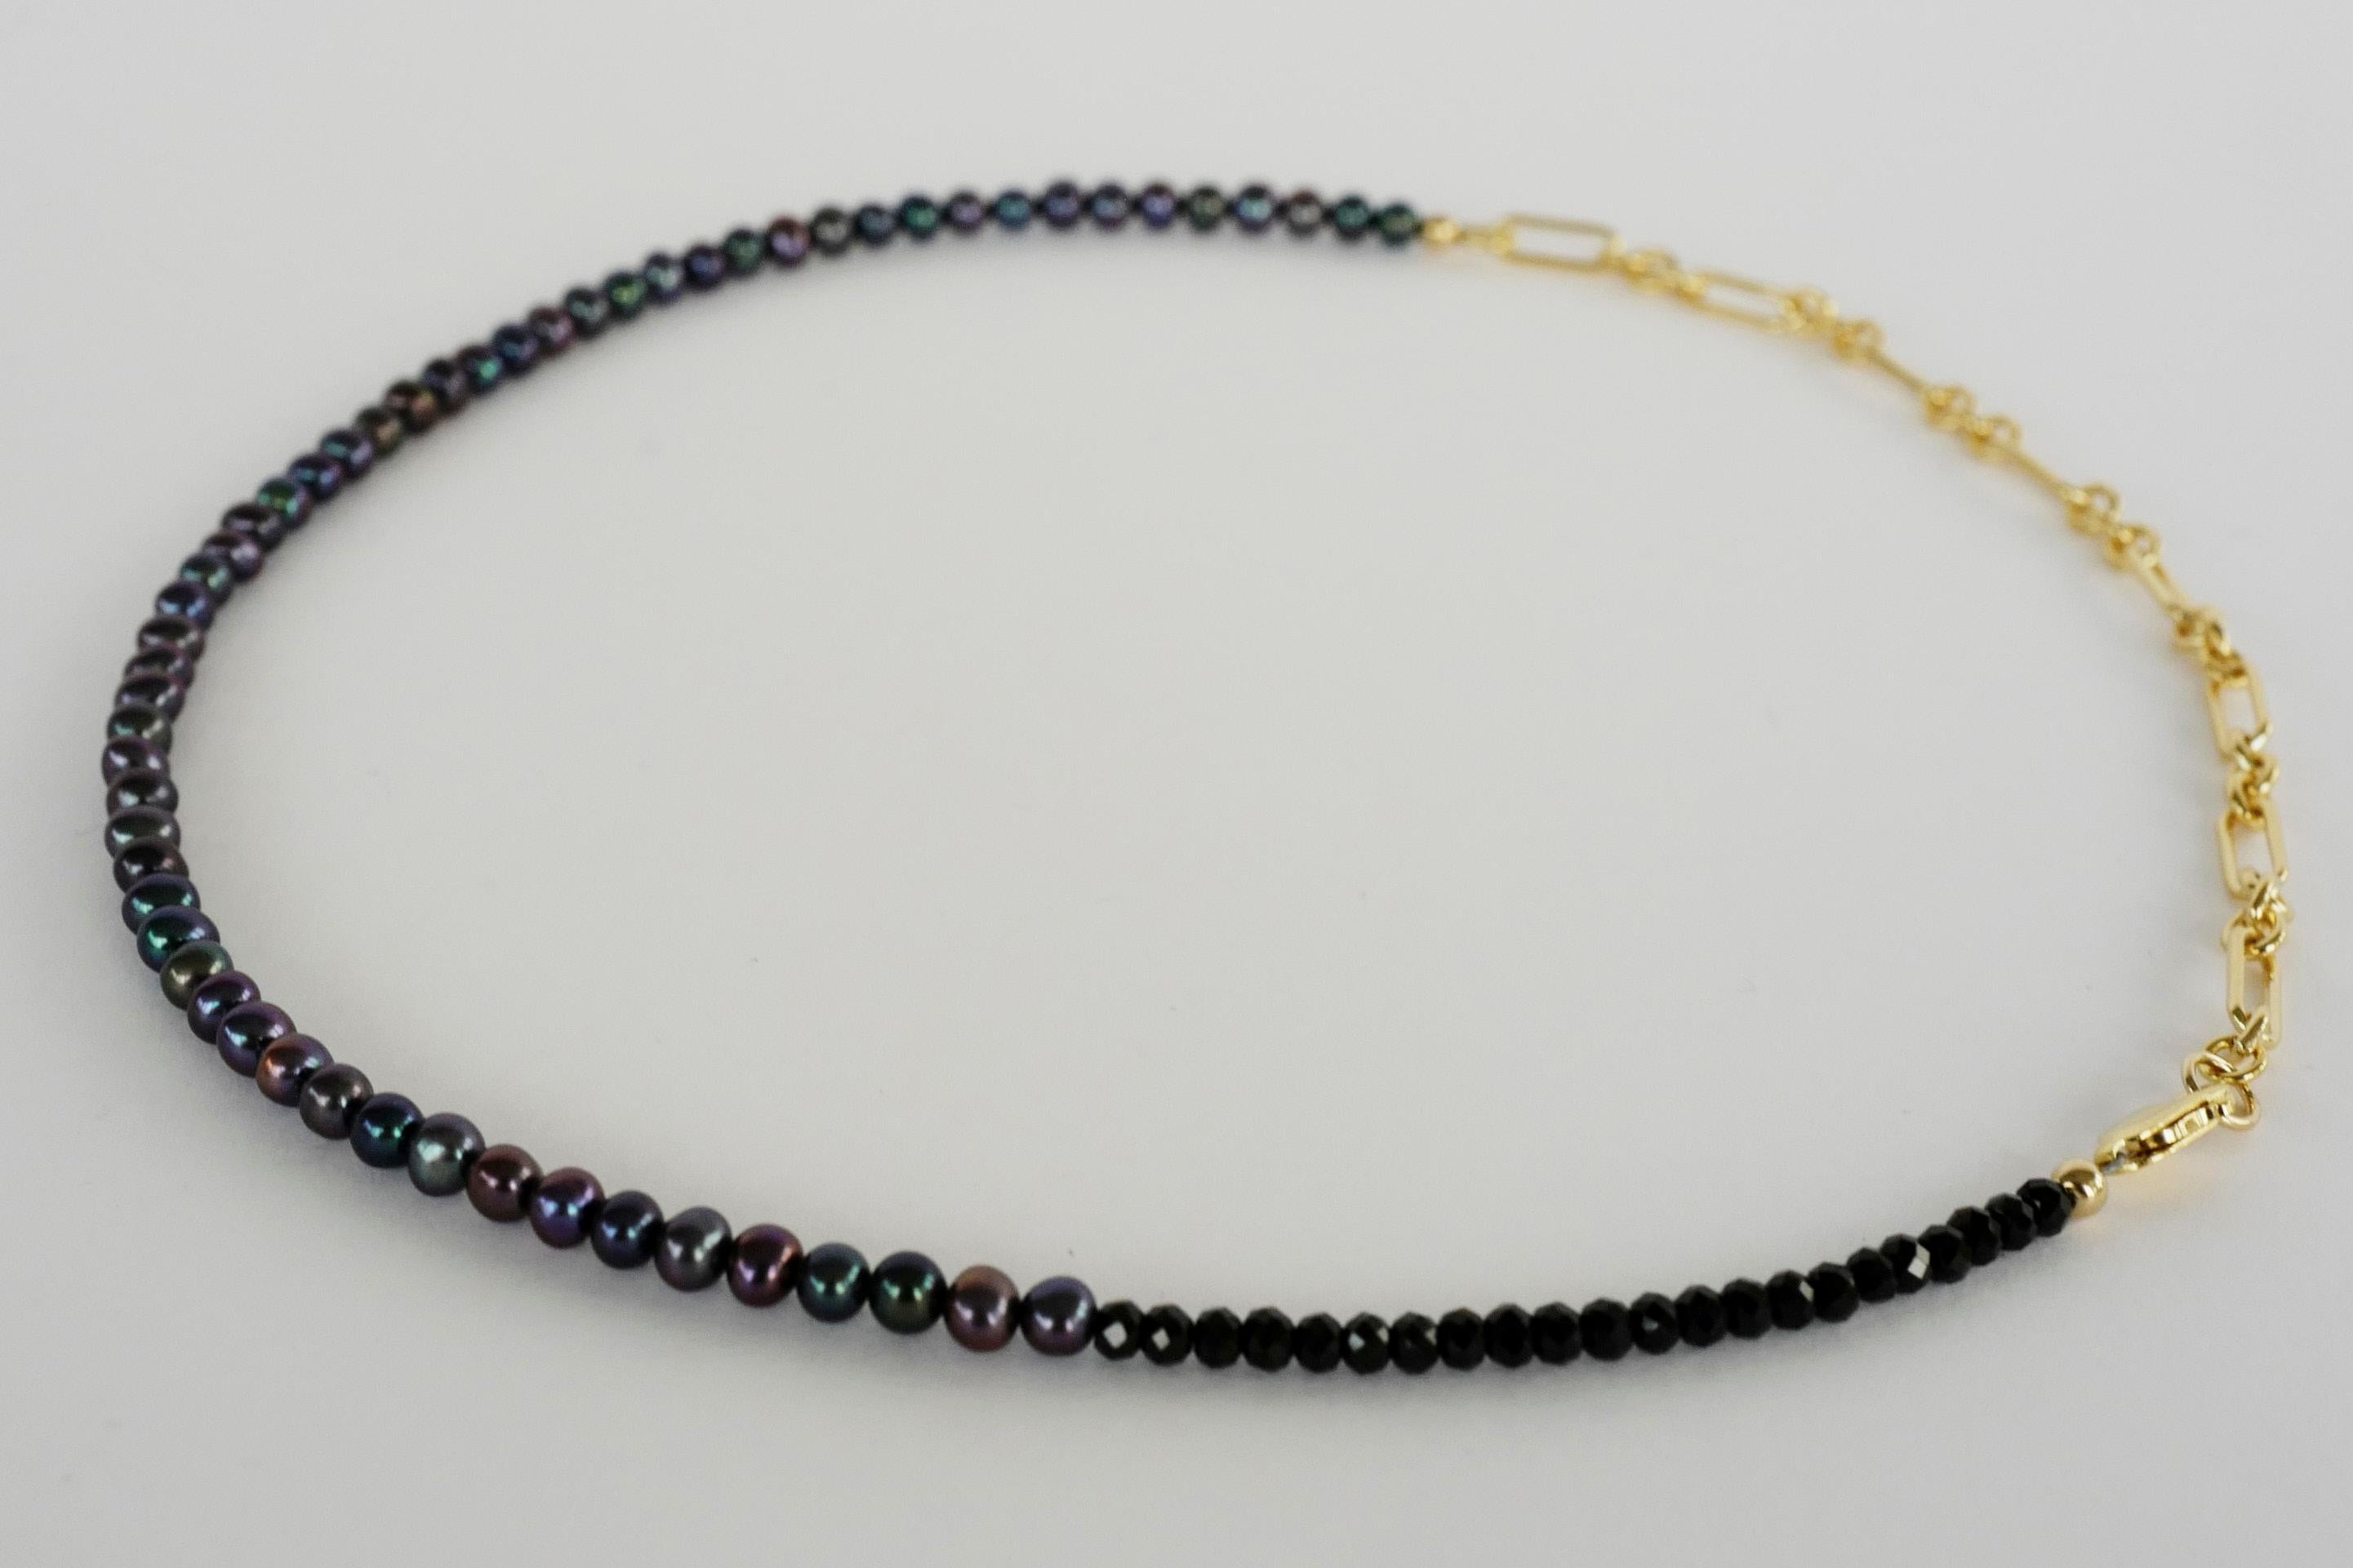 Round Cut Black Pearl Beaded Choker Necklace Black Spinel Gold Filled Chain J Dauphin For Sale